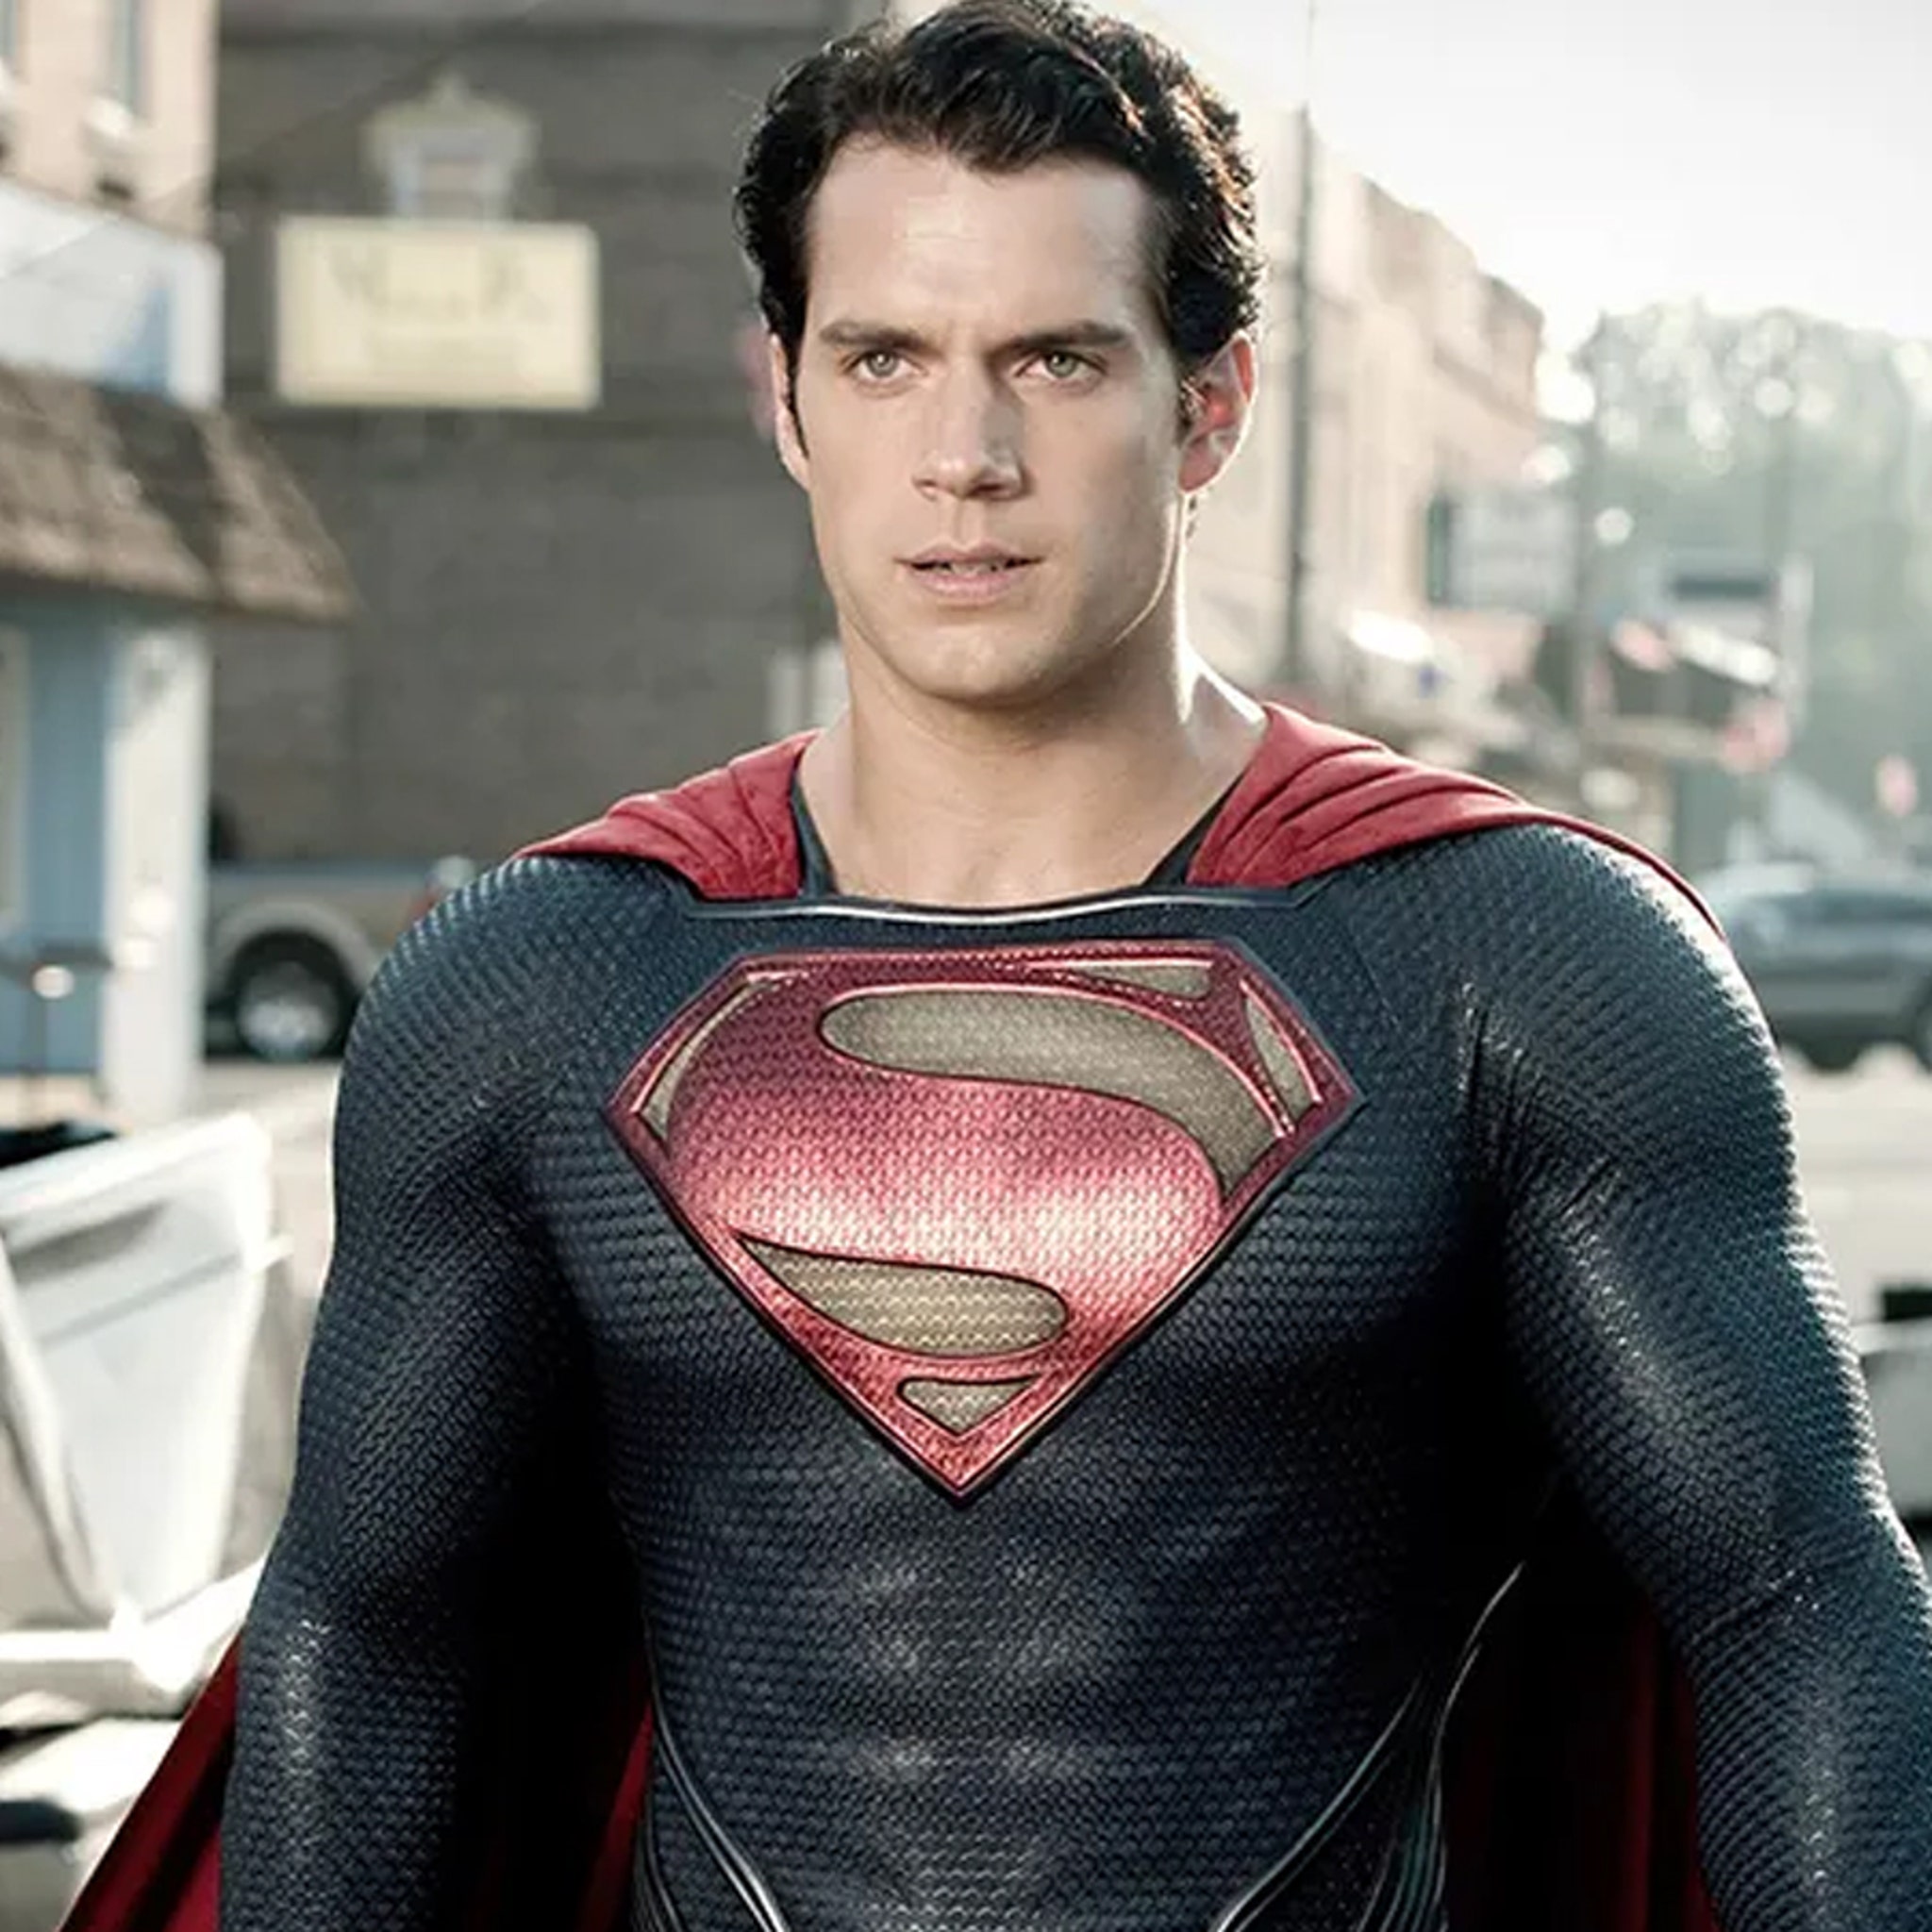 Henry Cavill on returning to play Superman